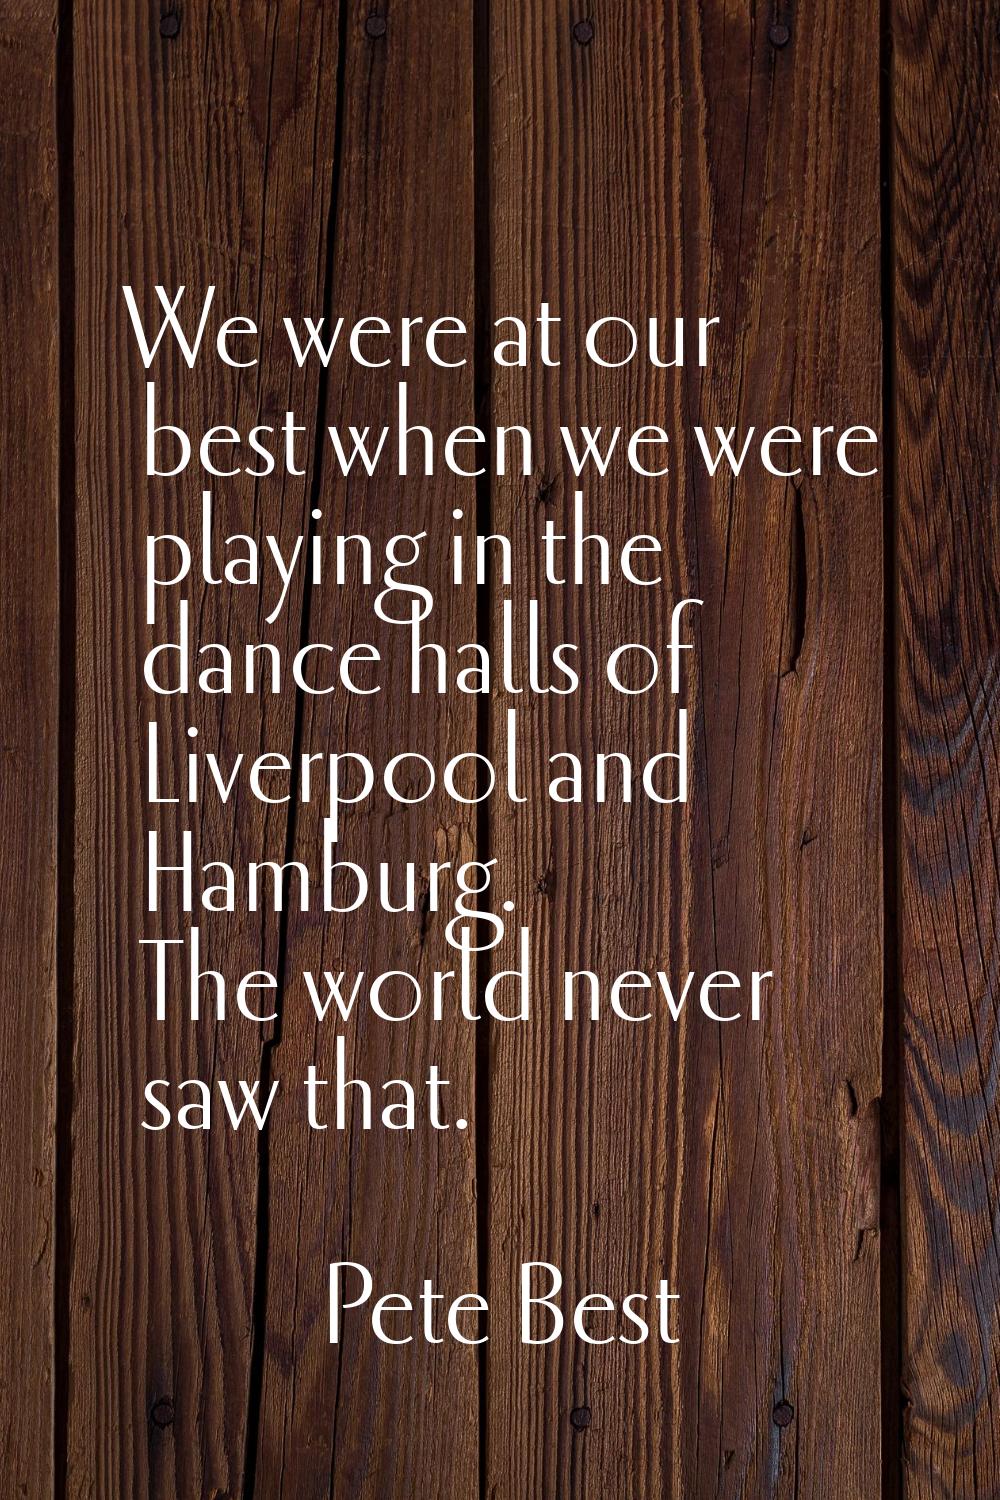 We were at our best when we were playing in the dance halls of Liverpool and Hamburg. The world nev